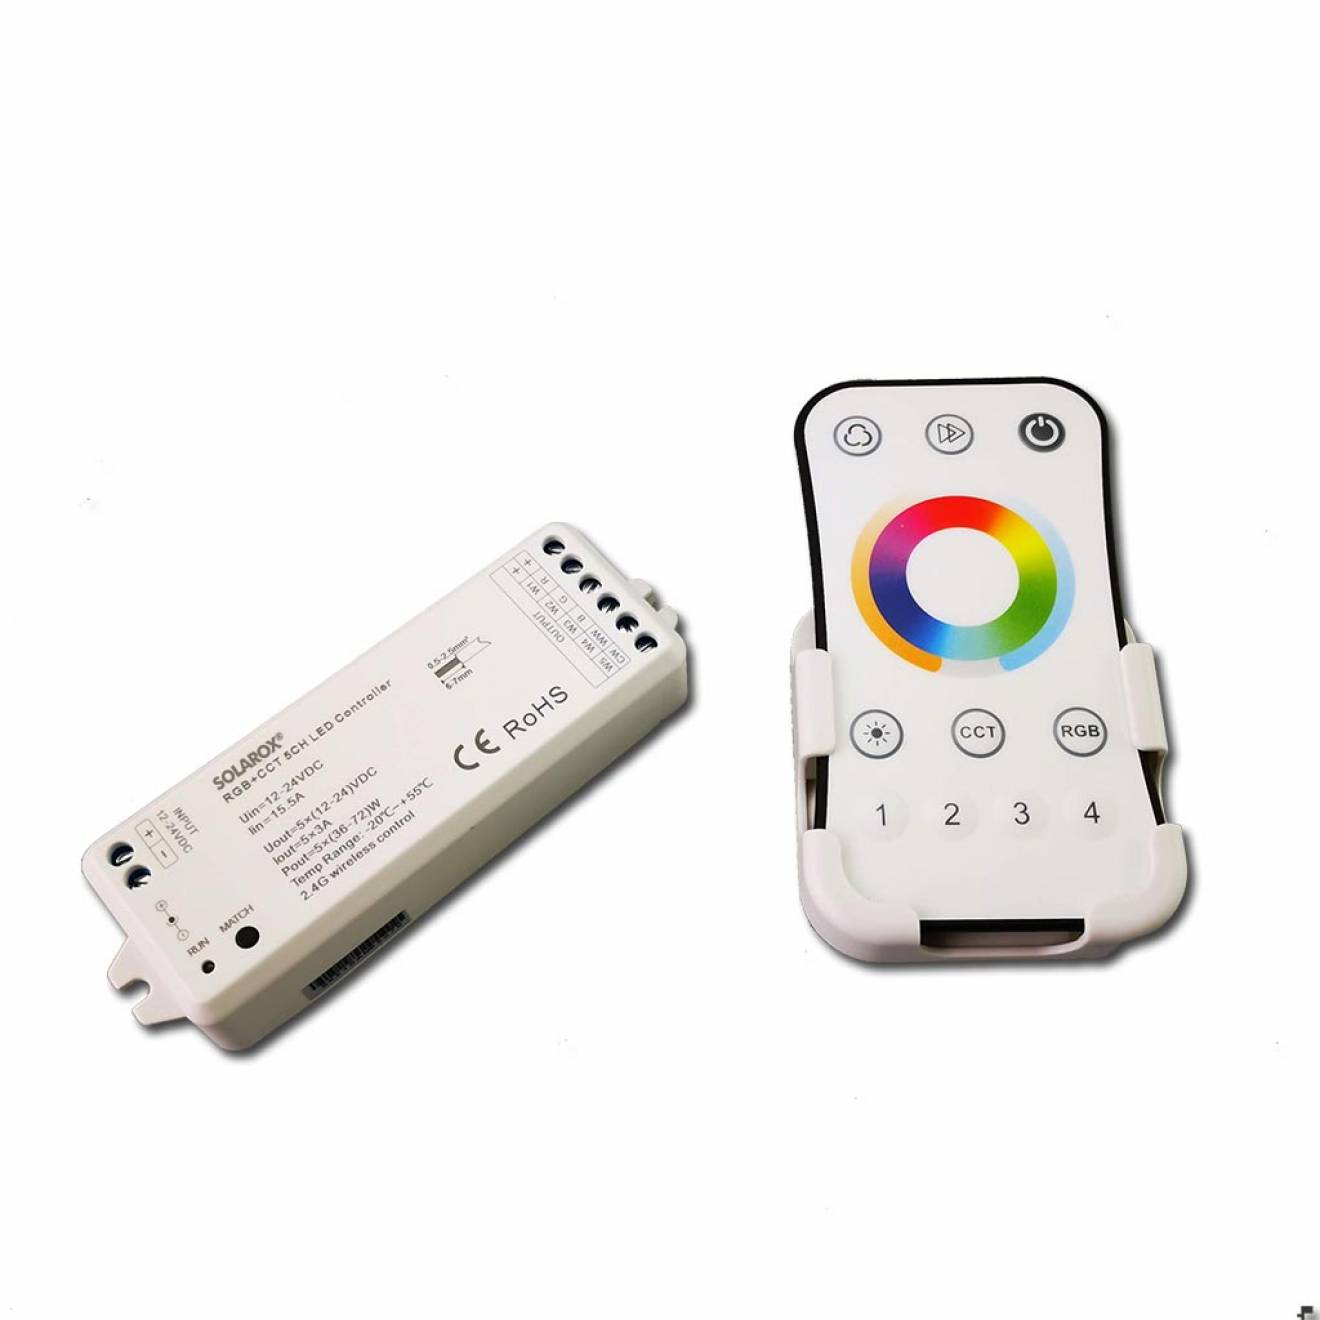 Outdoor LED light remote control dimmer - EZ Waterproof Low Voltage/LED  Dimmer with Teachable Remote